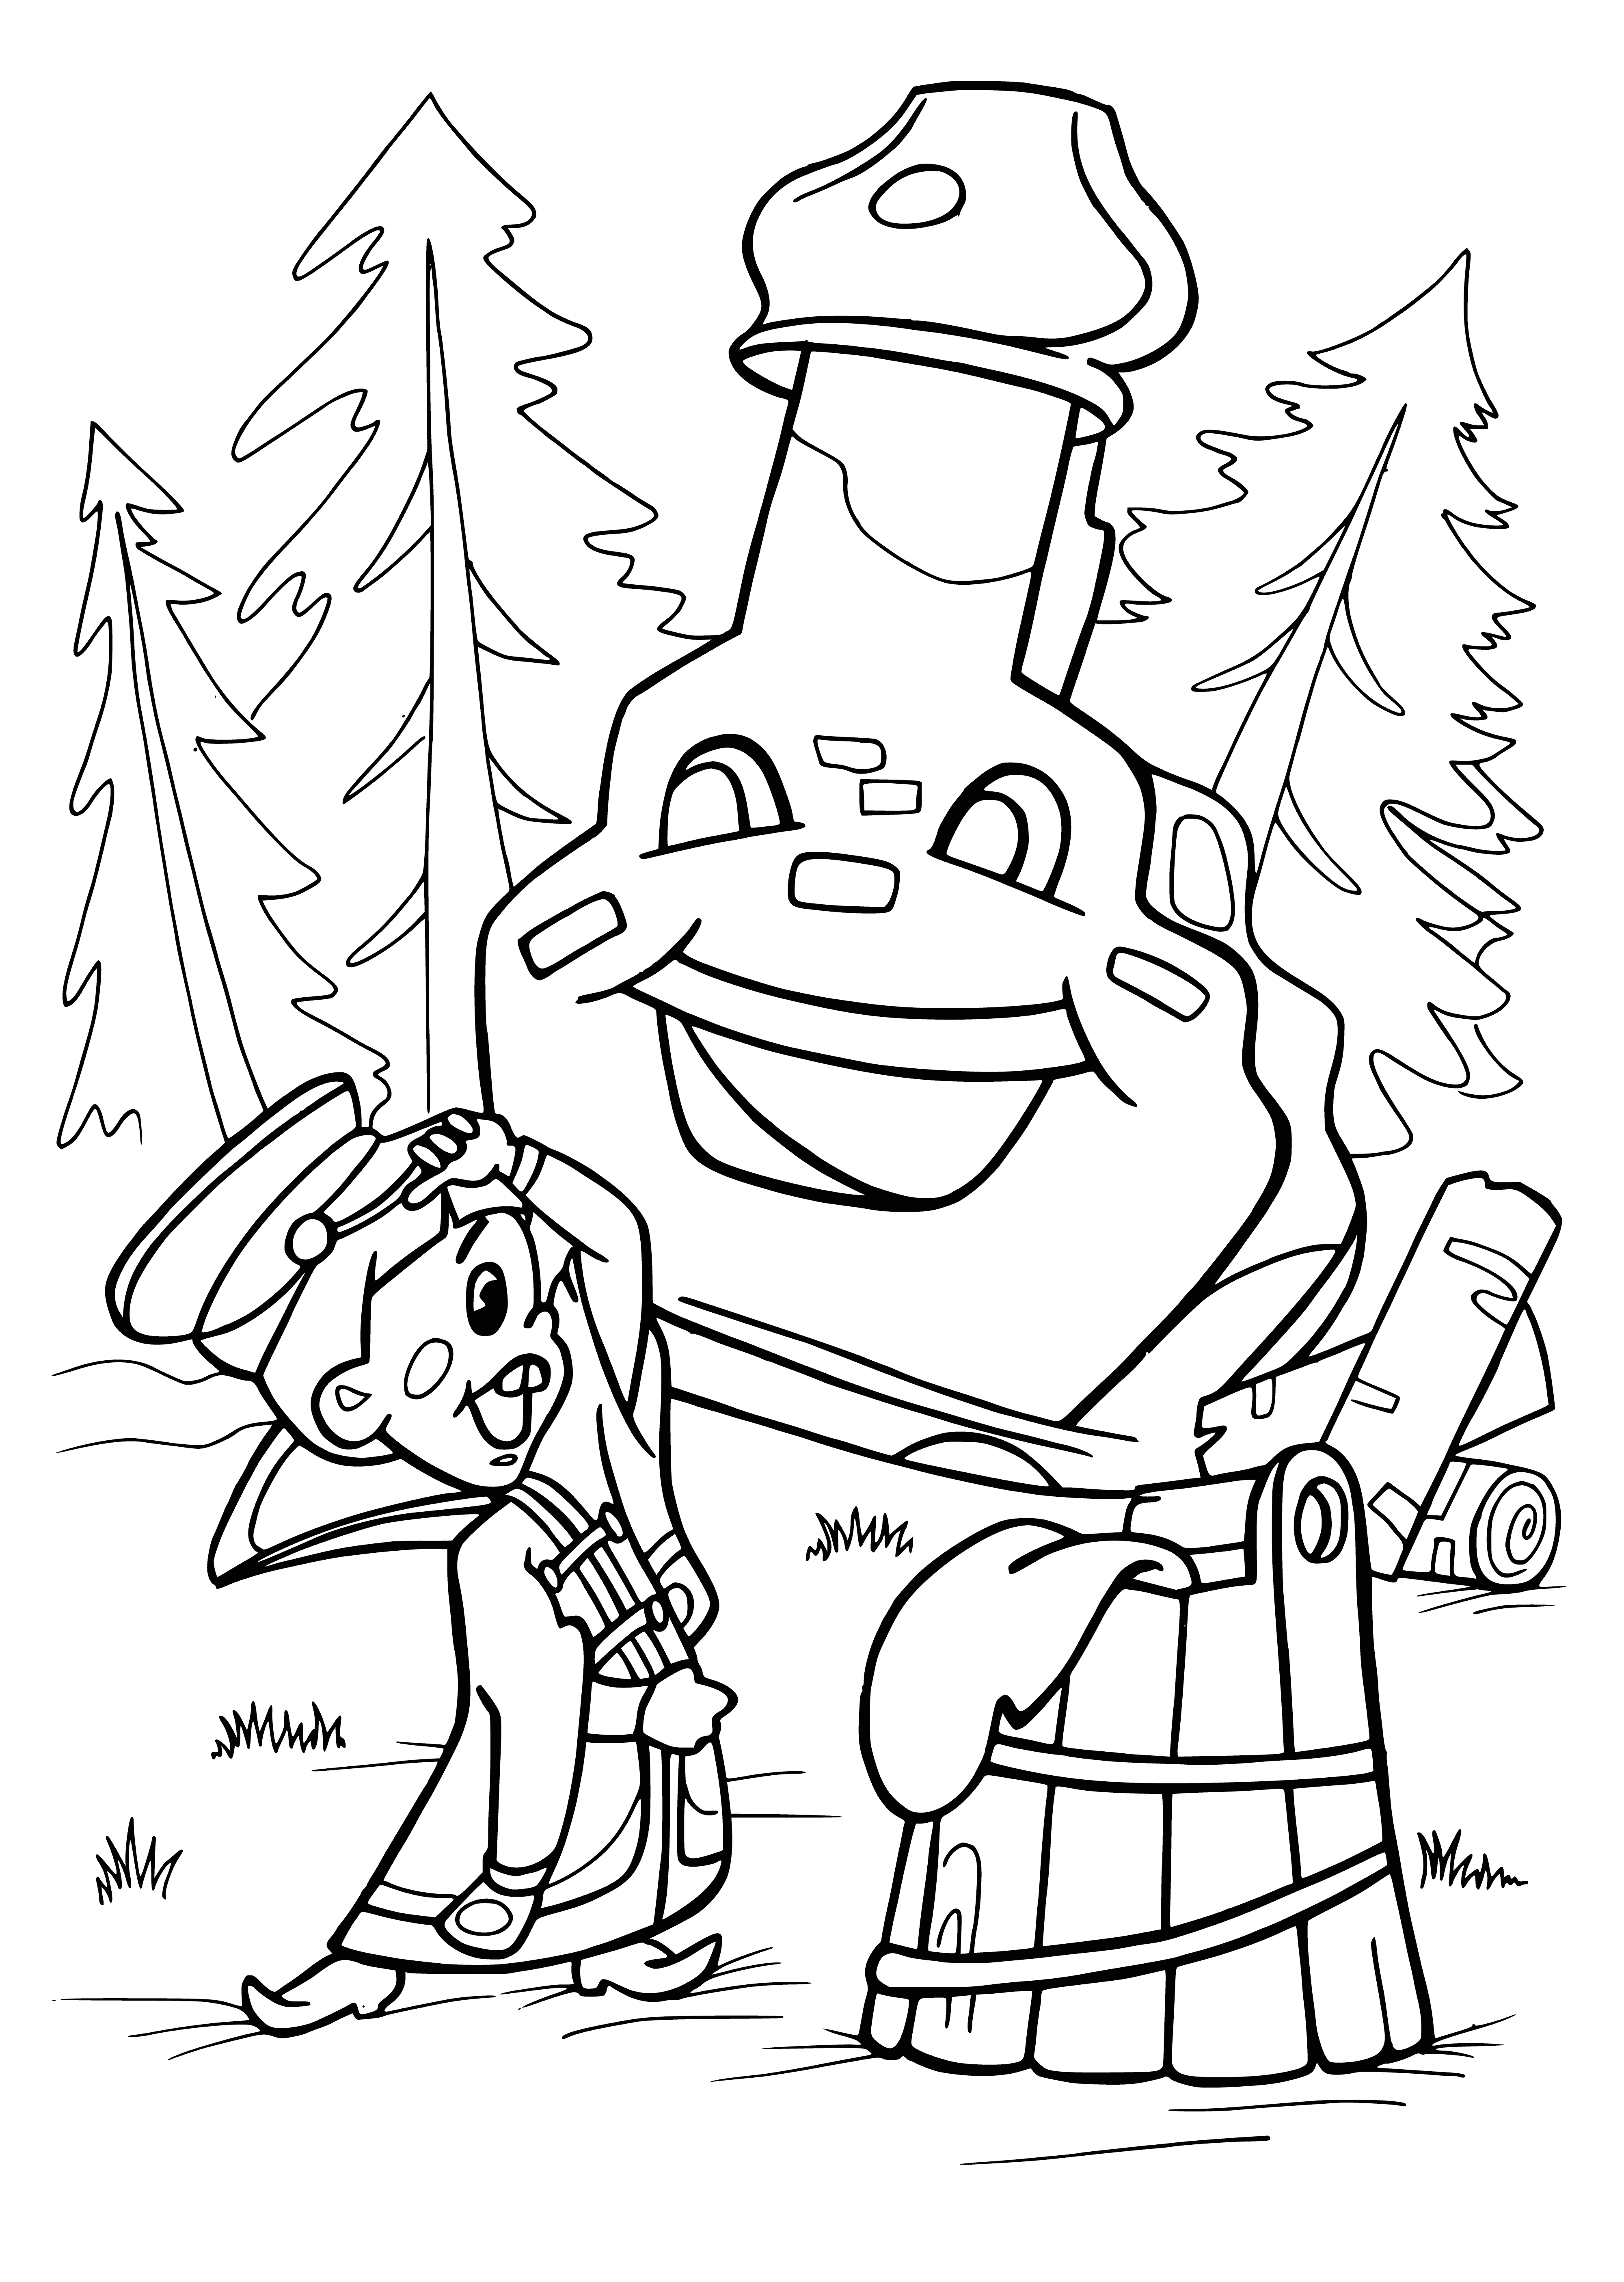 coloring page: In Stove, a Vovka with a long nose, small and brown, eats bugs in the forest.